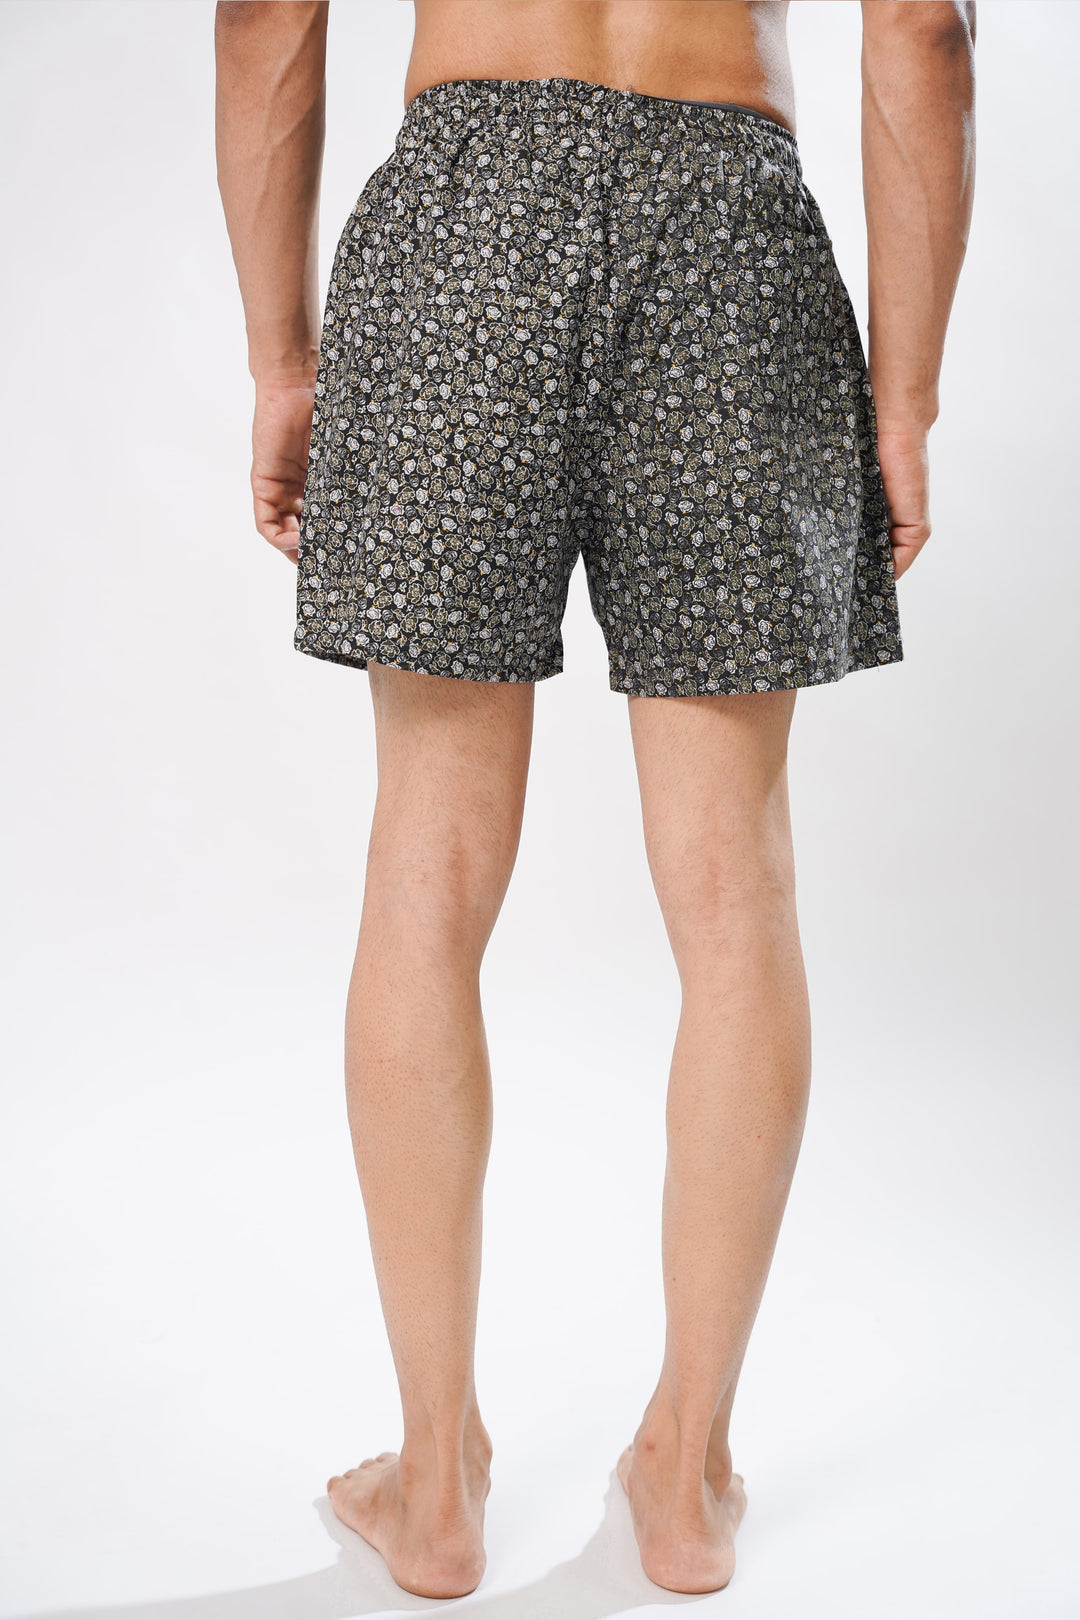 GREY MINI FLOWER ALL OVER PRINTED MENS BOXERS